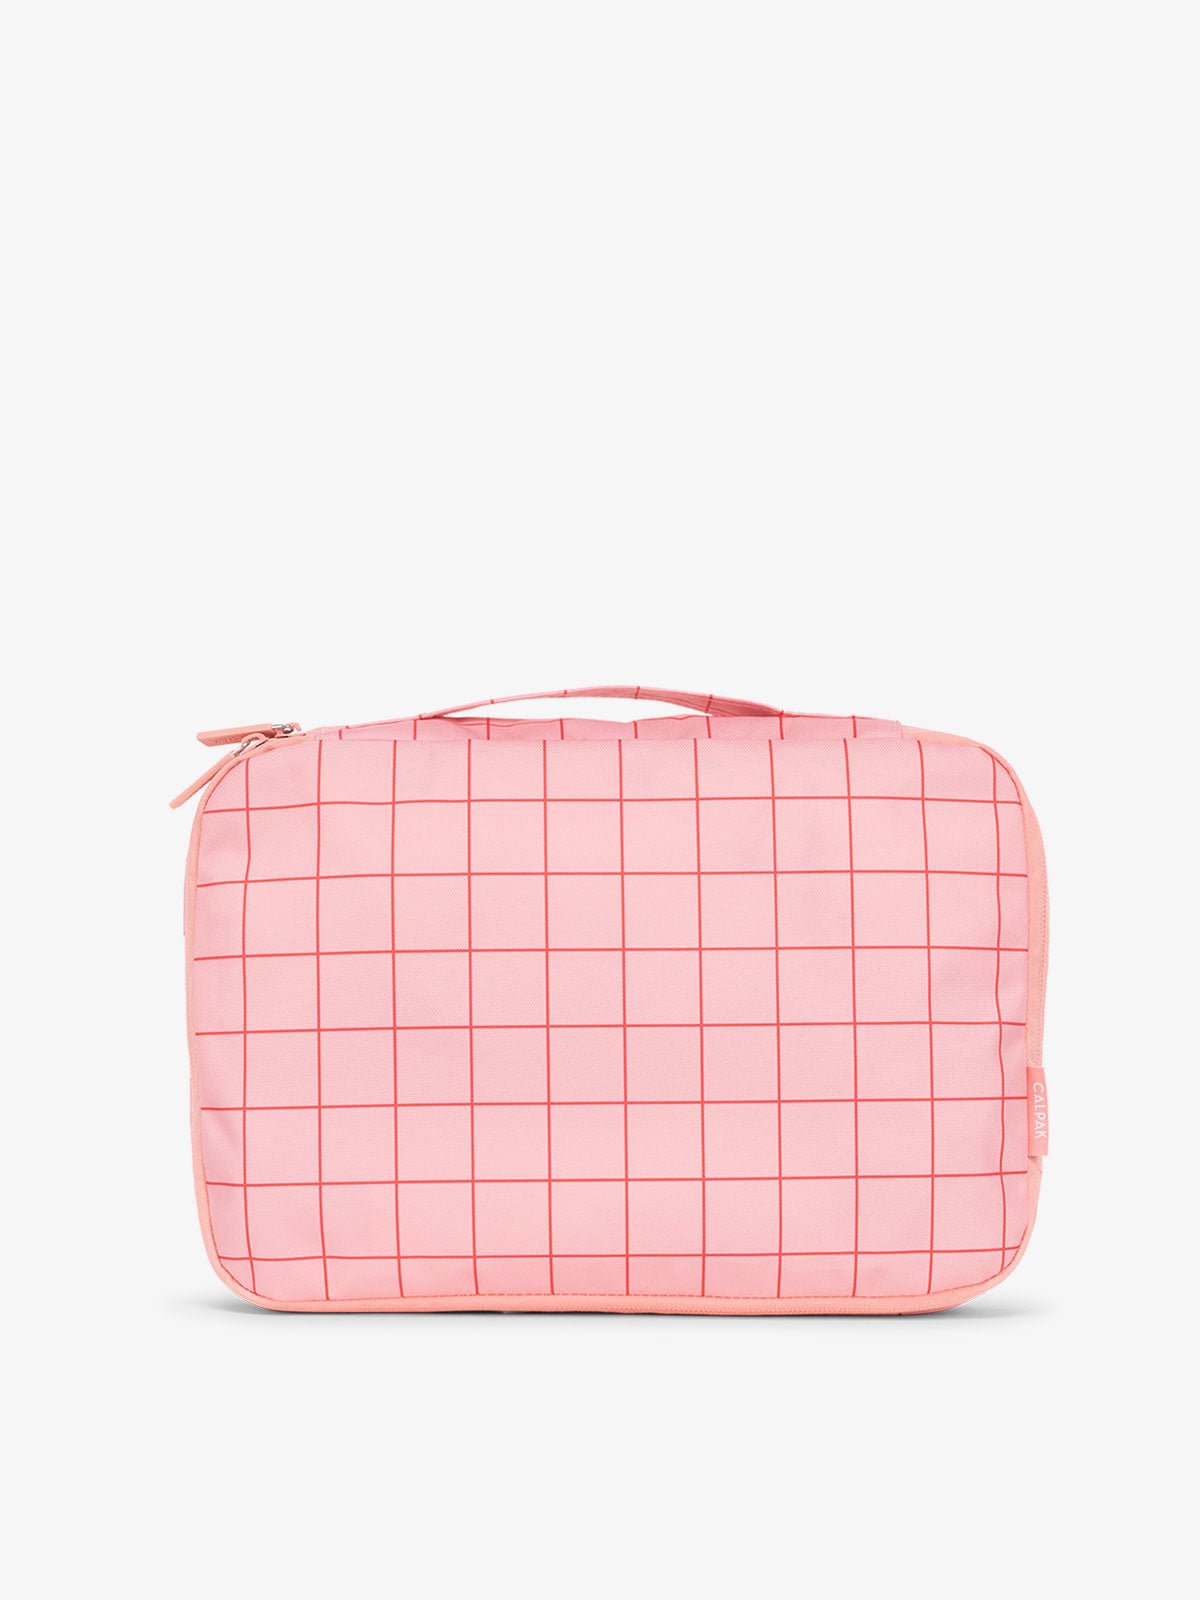 CALPAK packing cubes with top handle in pink grid print